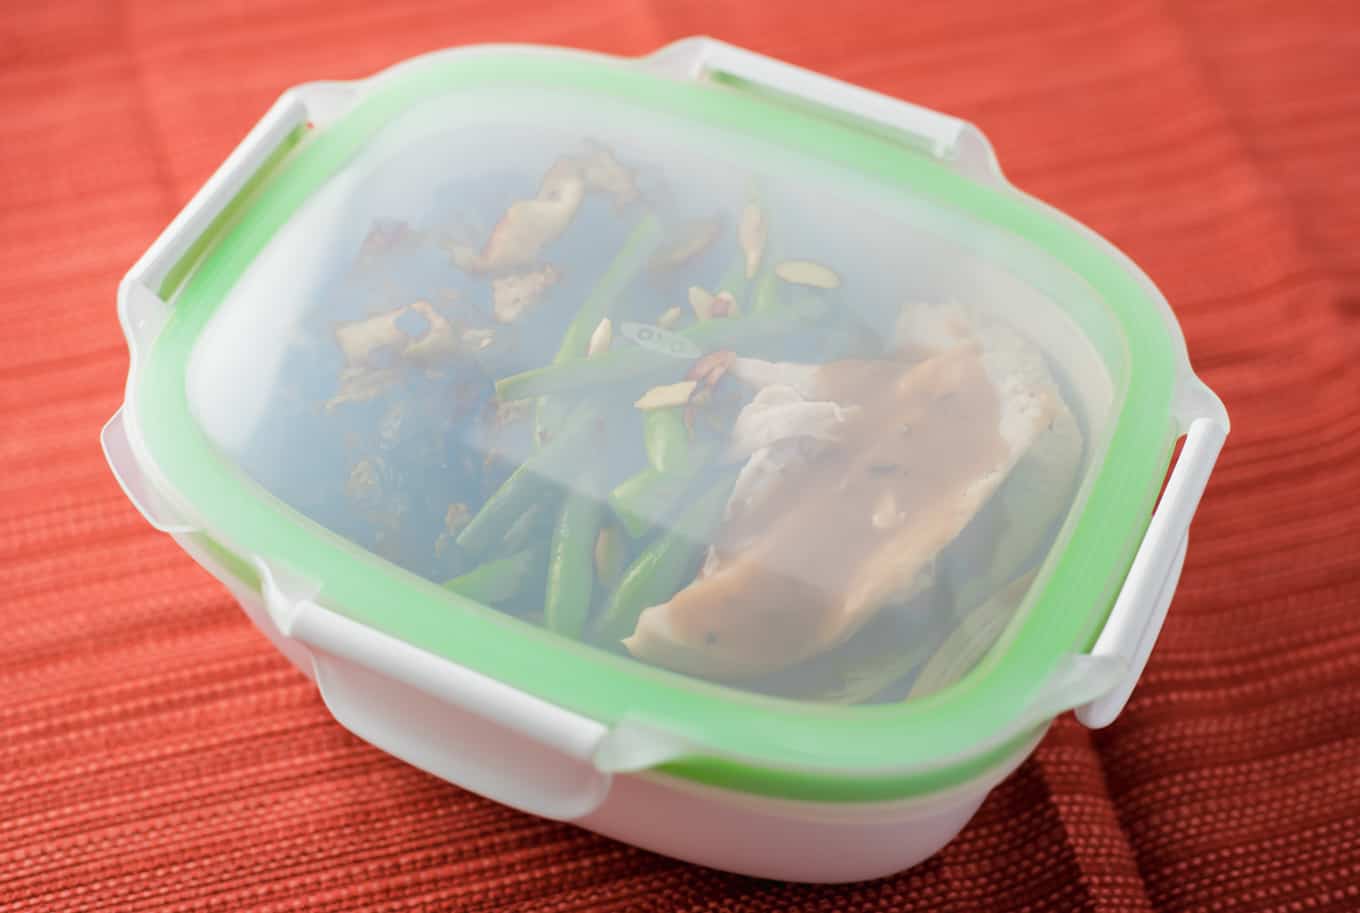 A plastic food storage container filled with food. Topped with a green lid.